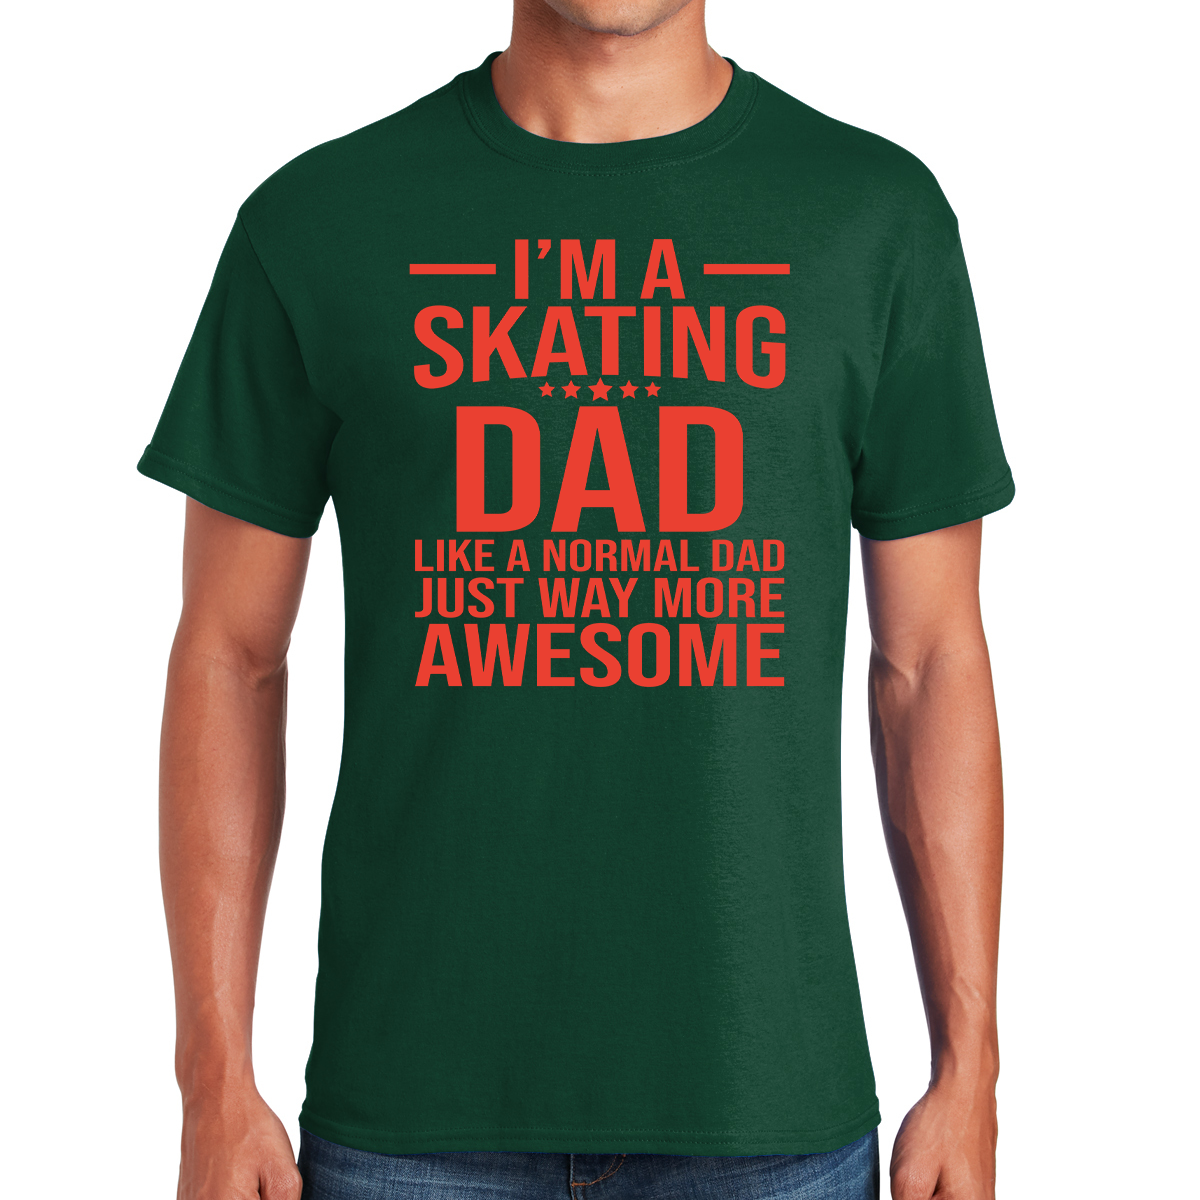 I'm a Skating Dad Like A Normal Dad Just Way More Awesome Gift For Dads T-shirt